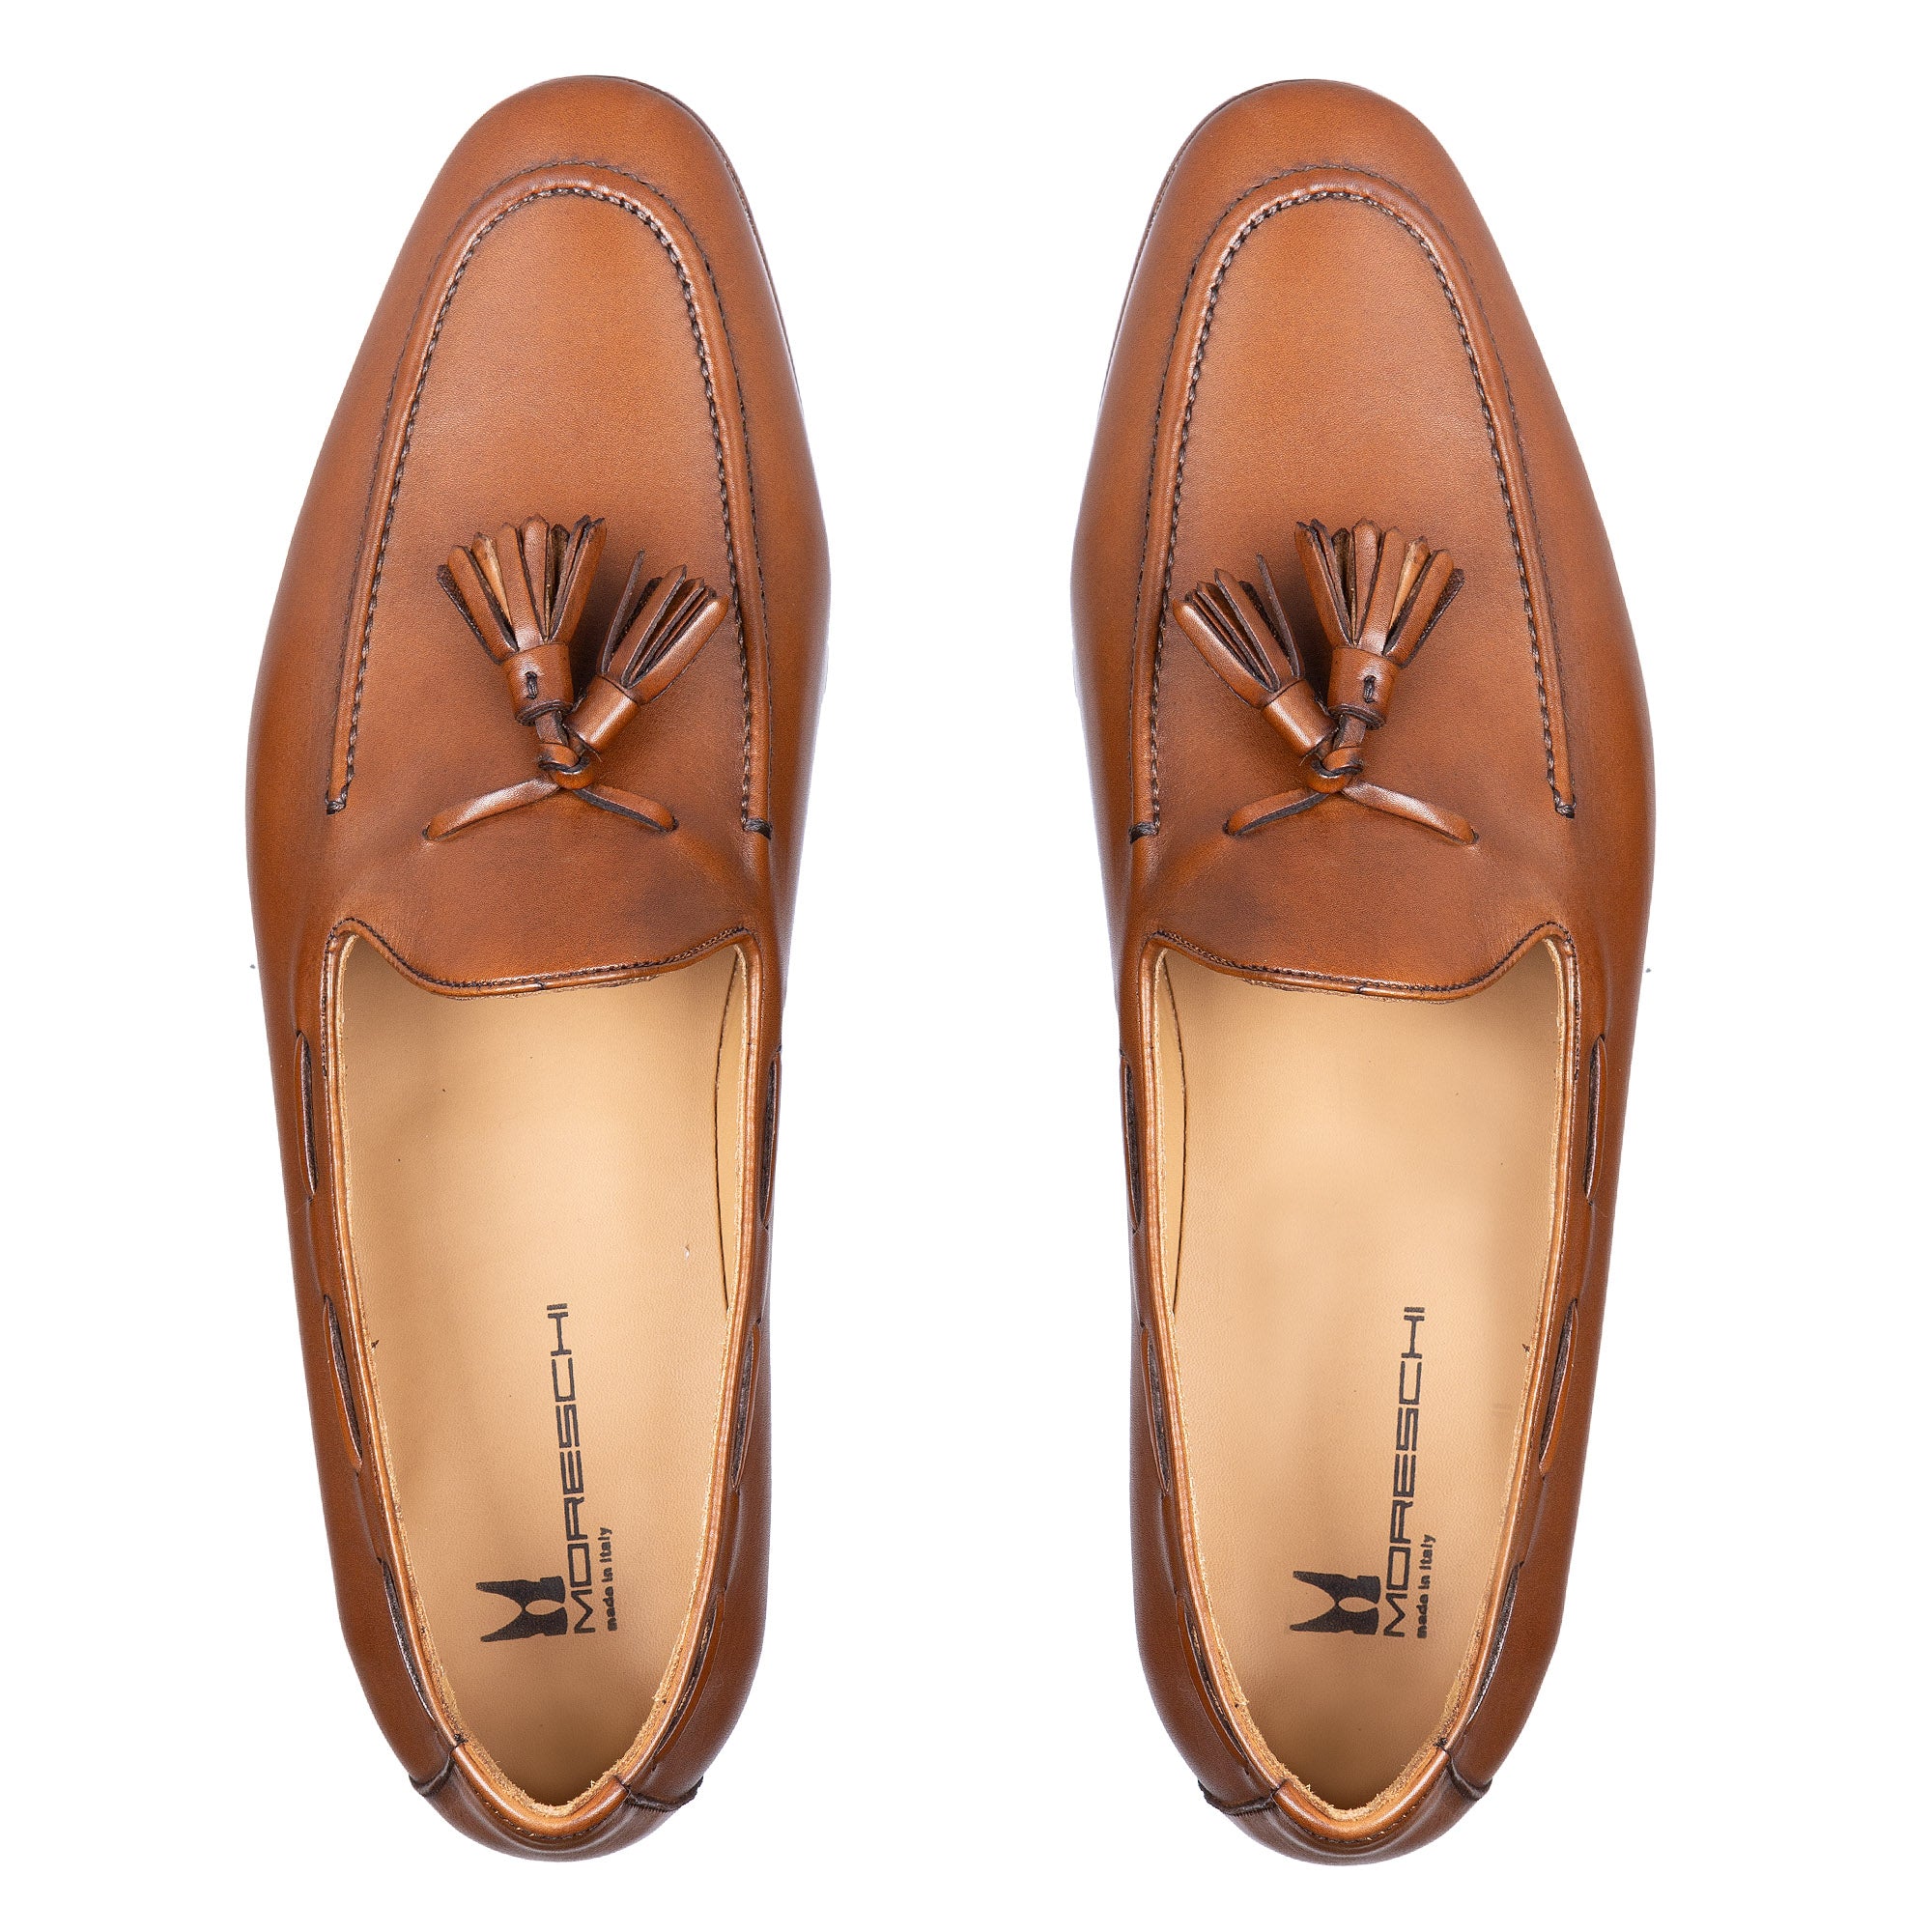 MORESCHI BUTTERFLY LOAFER SHOES BRANDY